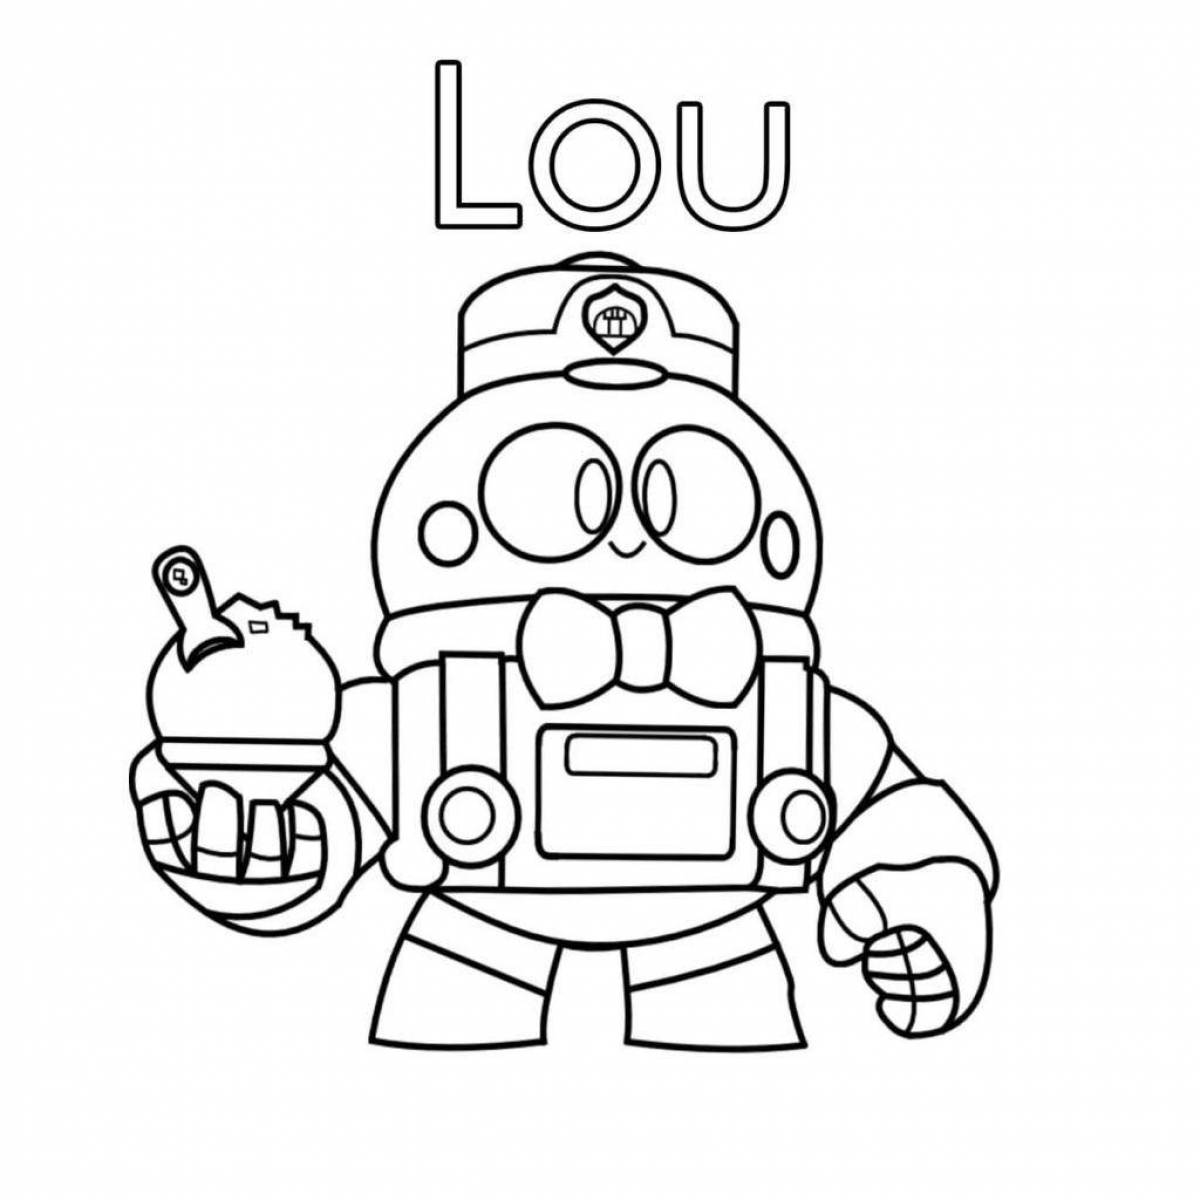 Brawl Stars Squeek Coloring Page